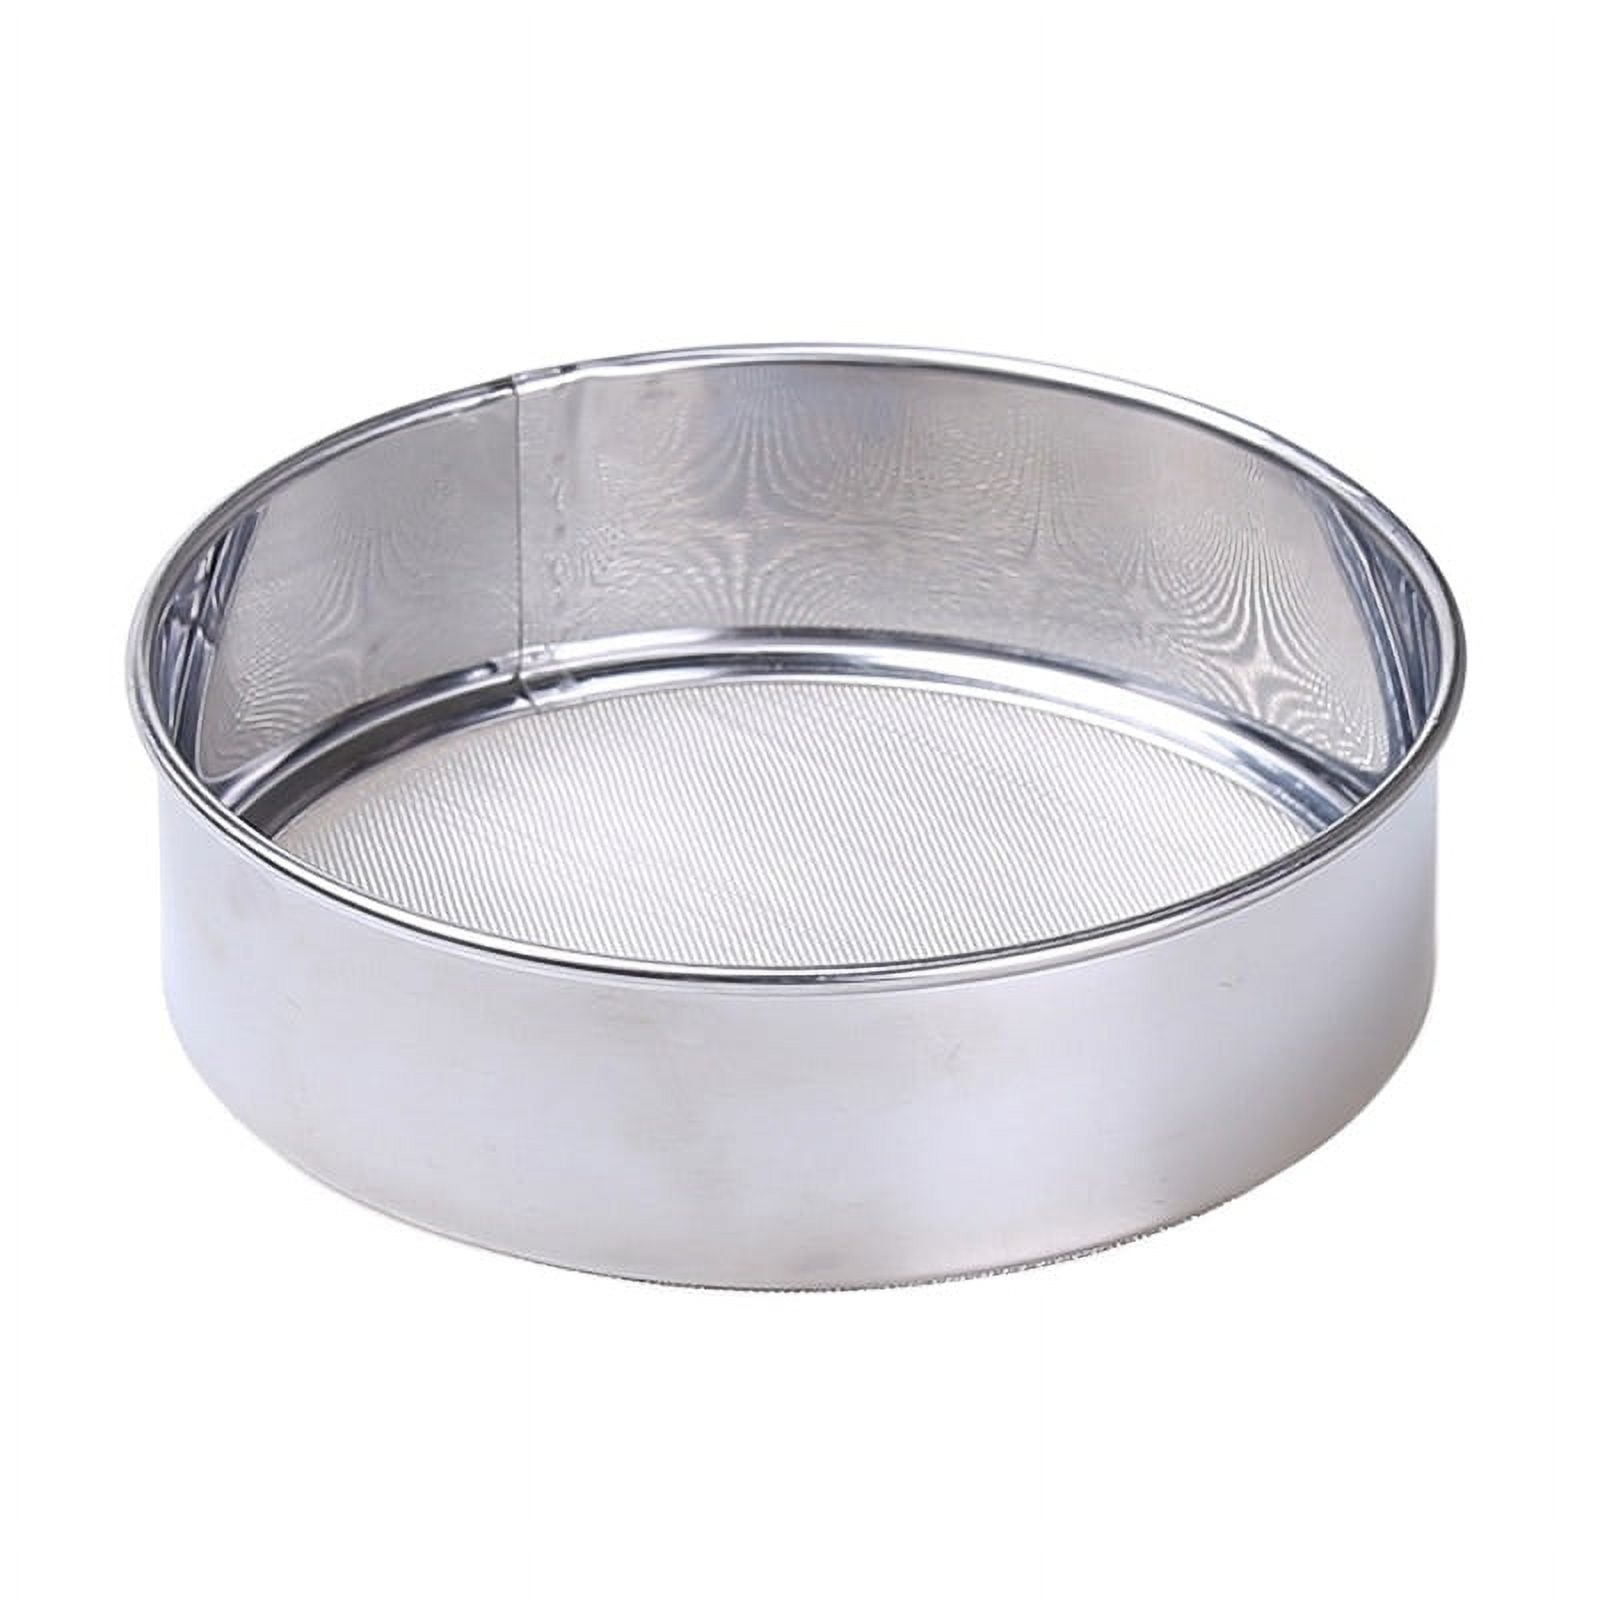 VEVOR Automatic Sieve Shaker Included 40 Mesh + 60 Mesh Flour Sifter Electric Vibrating Sieve Machine 110V 50W Strainers, Silver